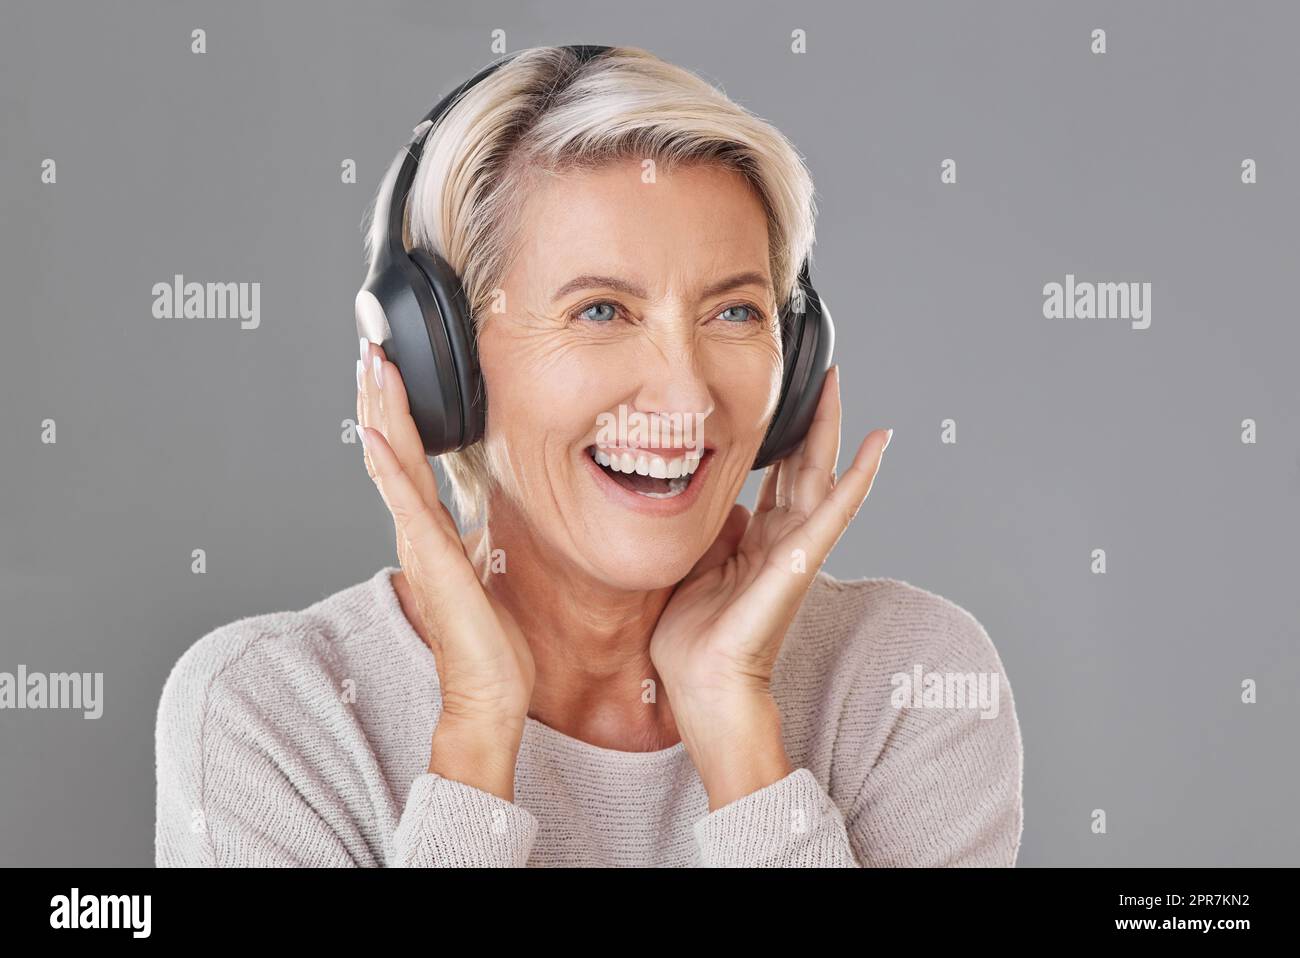 One happy mature woman isolated against a great background in a studio and wearing headphones to listen to music. Smiling caucasian senior with grey hair enjoying the loud music. Youthful and playful Stock Photo